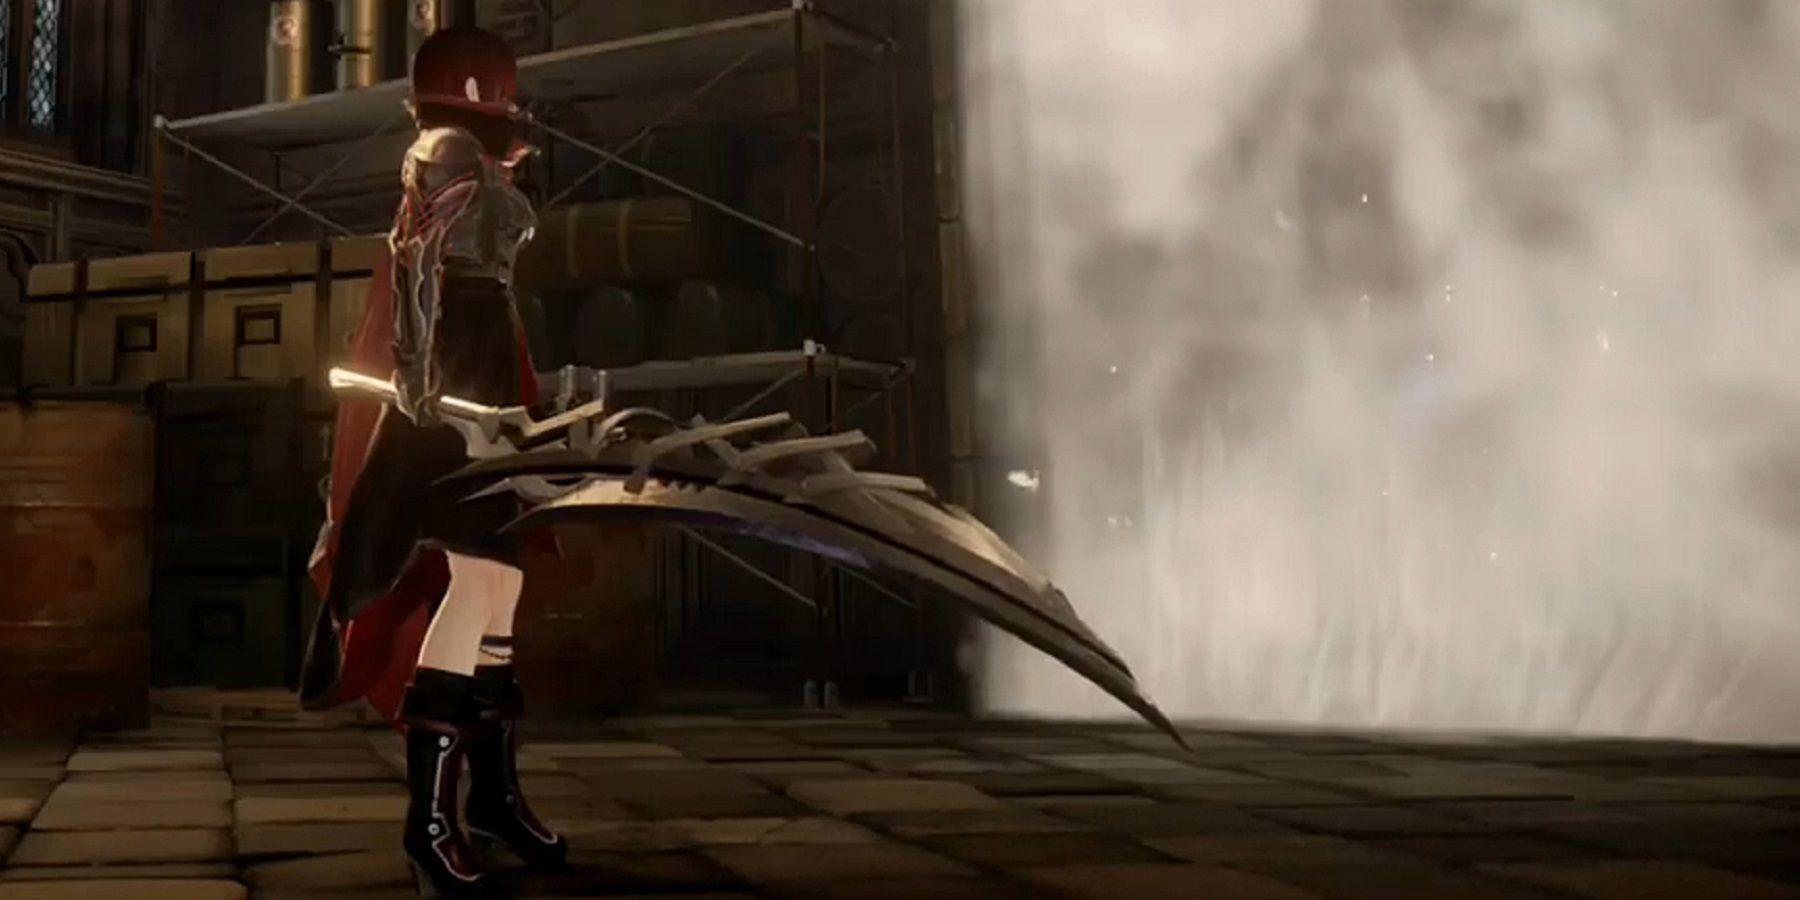 The Executioner from Code Vein.